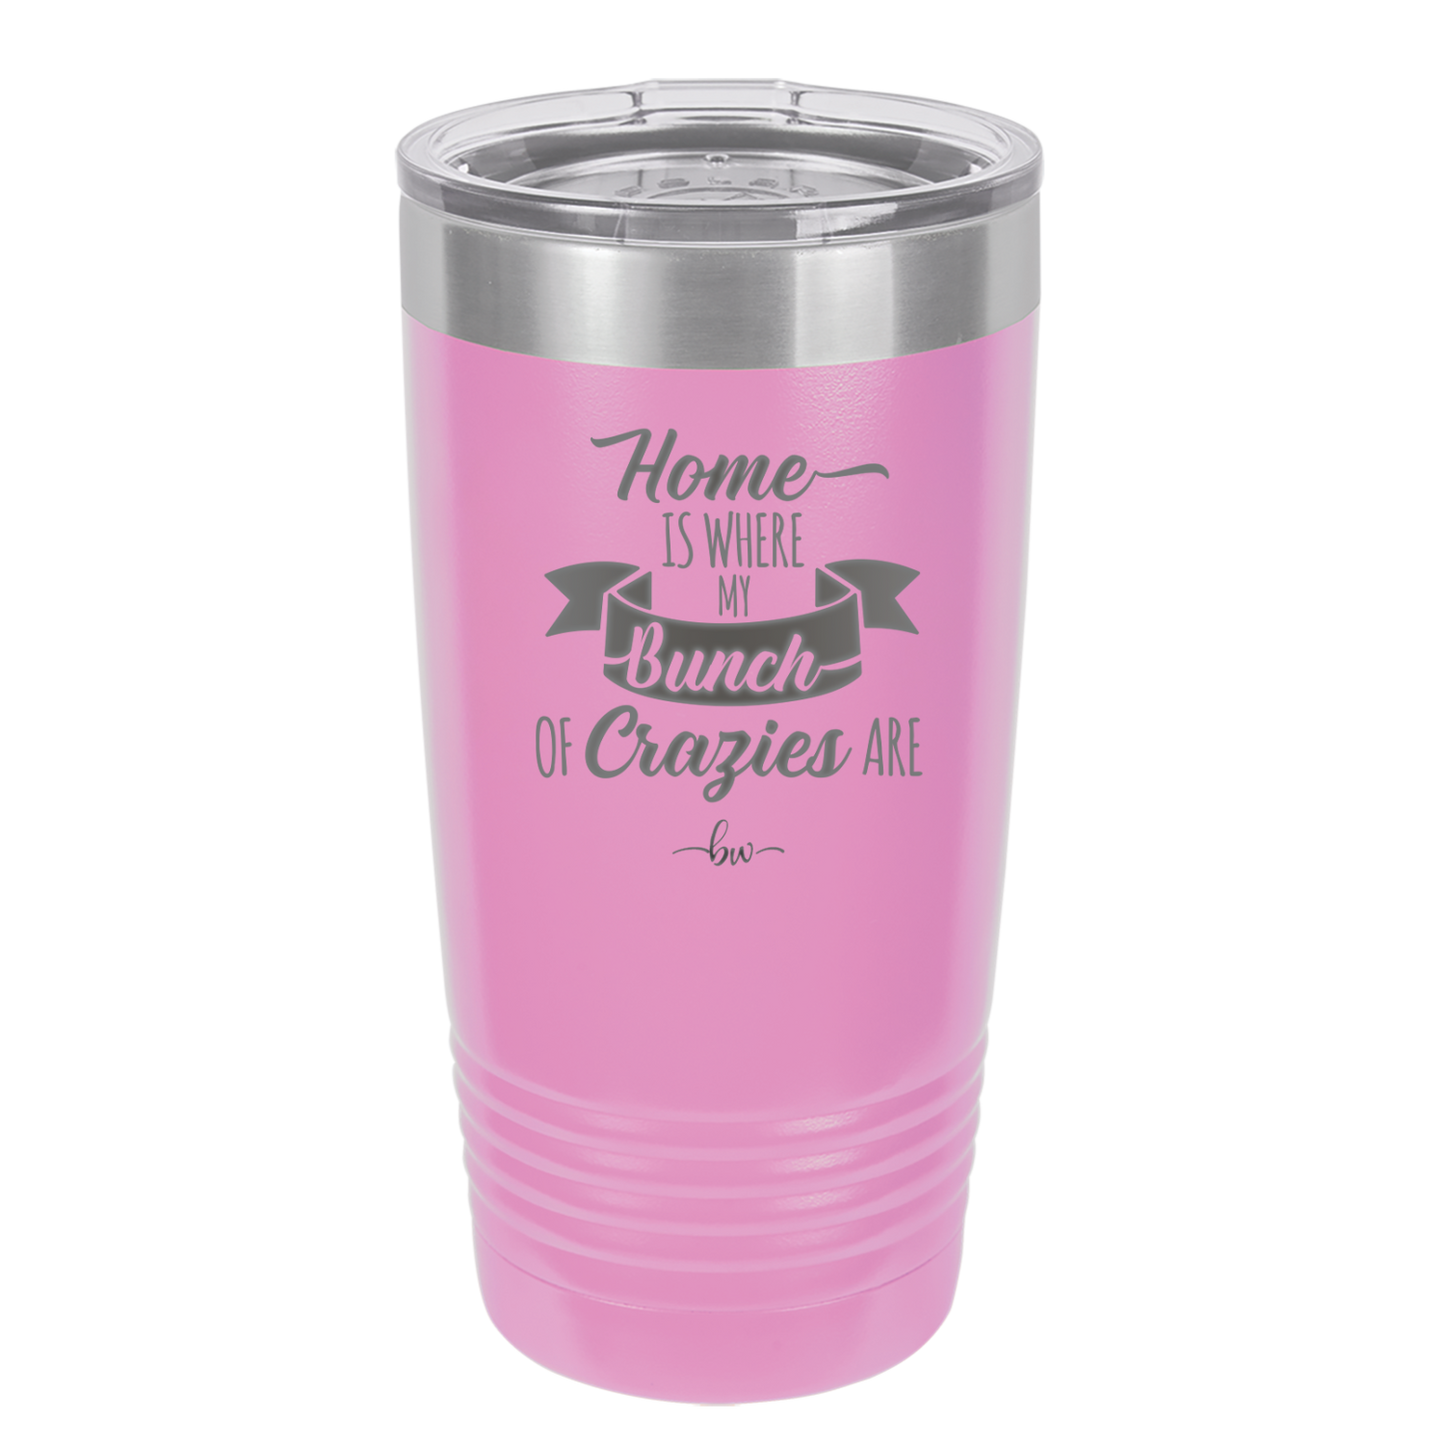 Home is Where My Bunch of Crazies Are - Laser Engraved Stainless Steel Drinkware - 2016 -